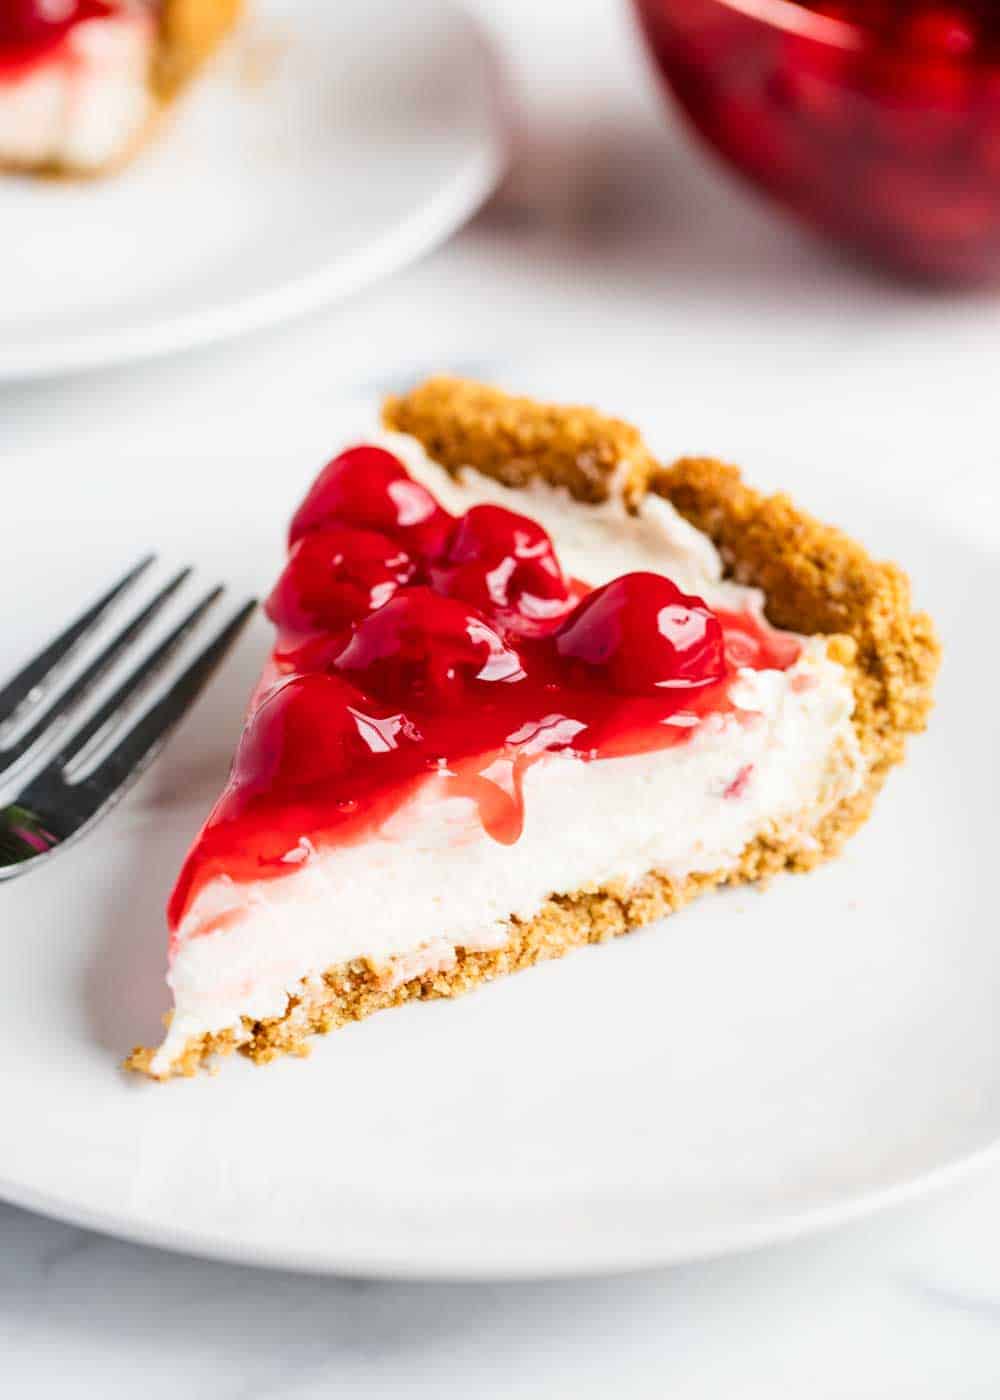 Slice of no bake cheesecake on plate.